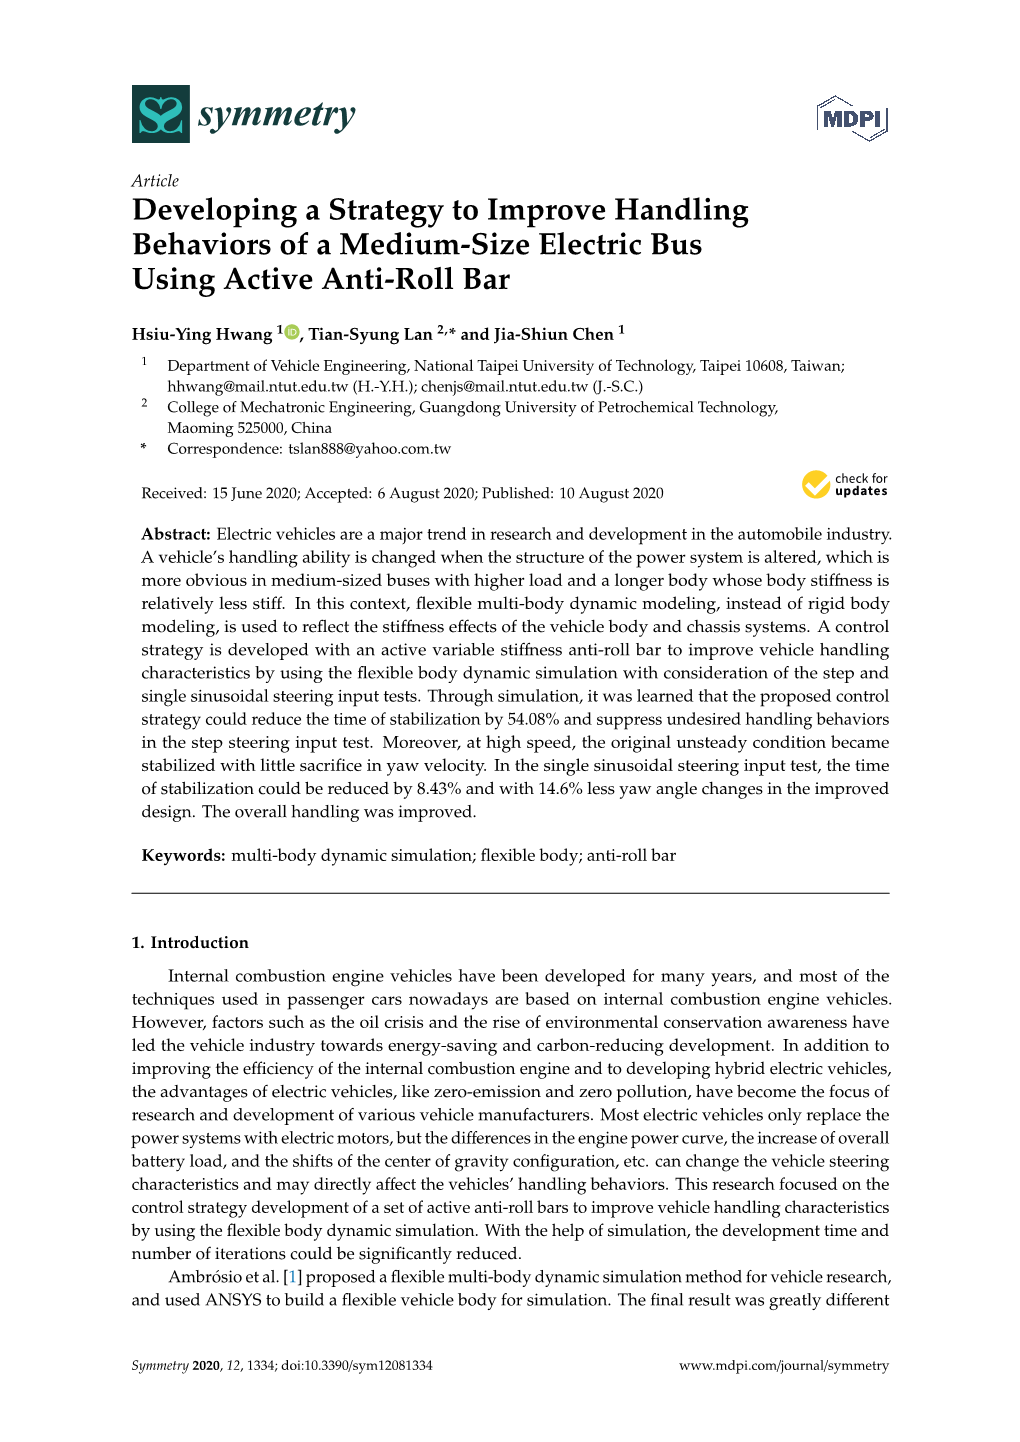 Developing a Strategy to Improve Handling Behaviors of a Medium-Size Electric Bus Using Active Anti-Roll Bar